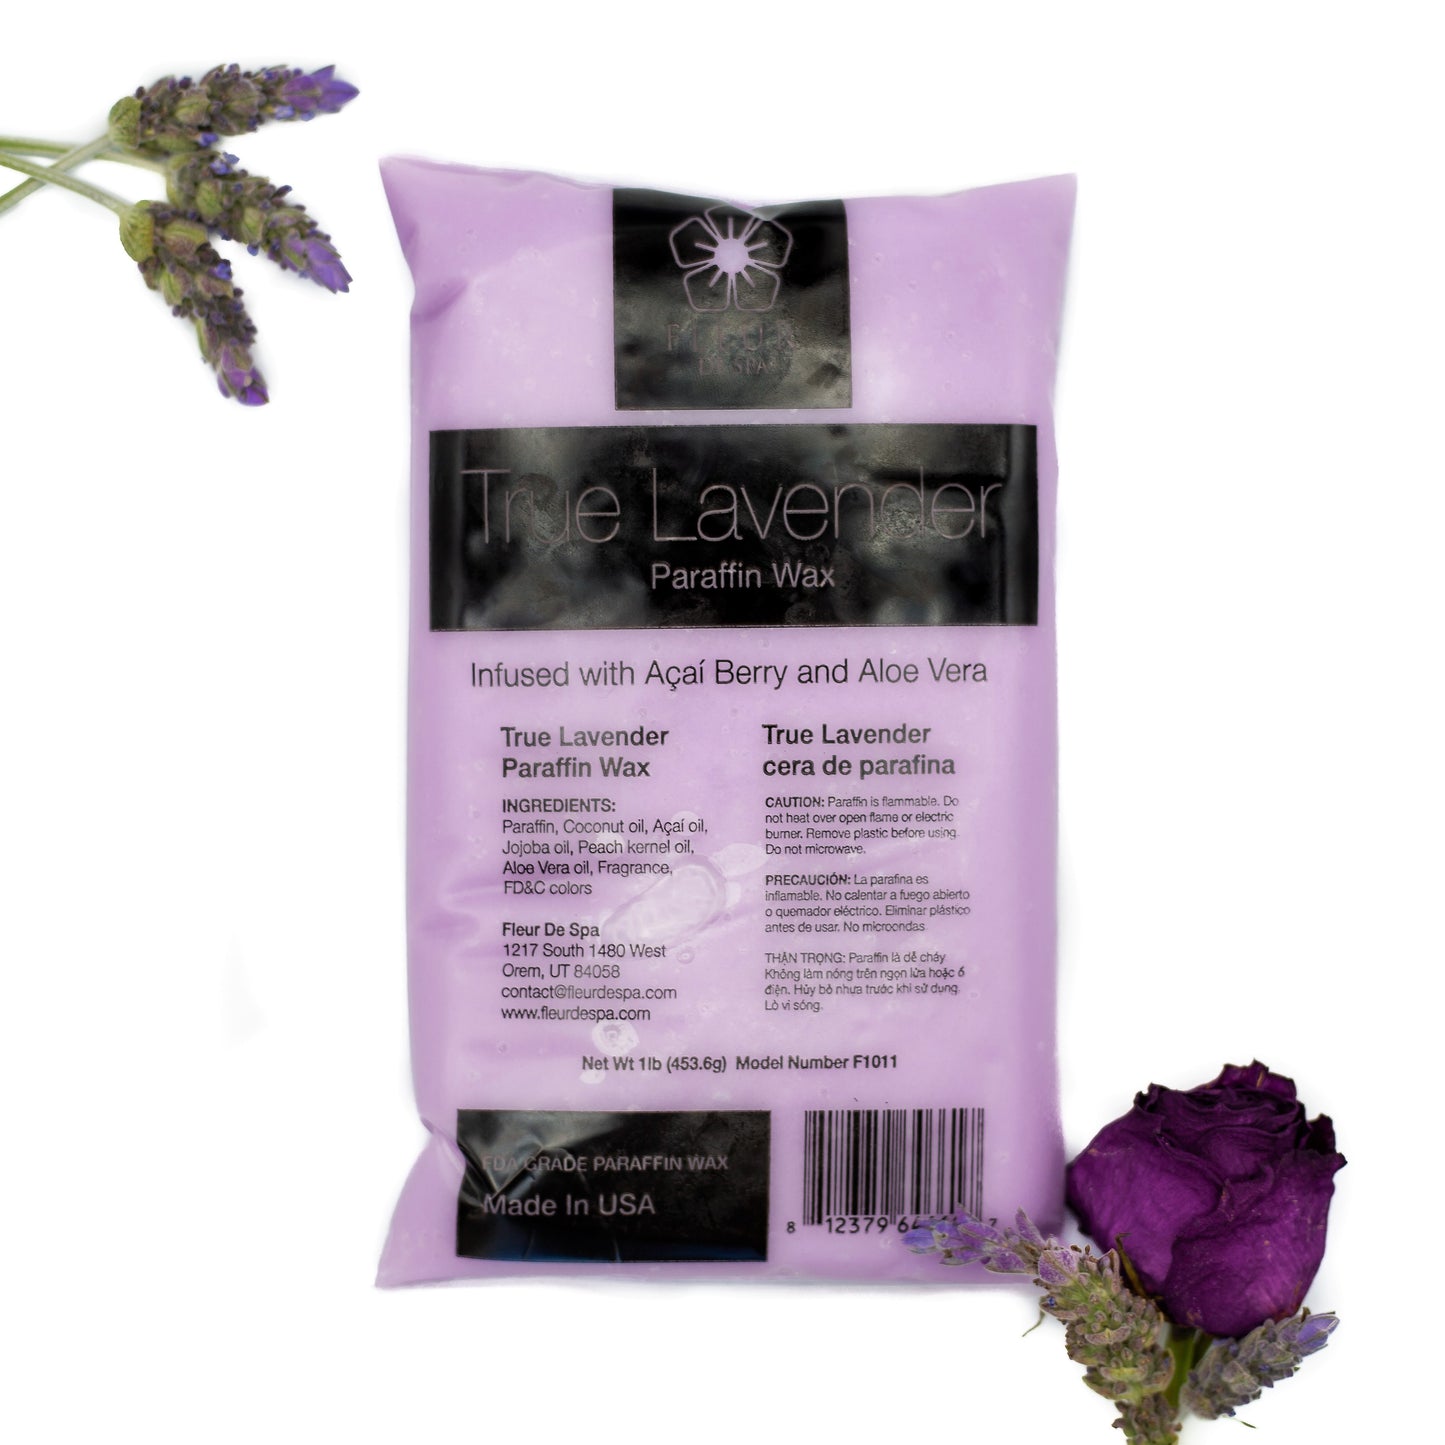 Paraffin Wax Refill from Fleur De Spa - USA made Paraffin for hands and feet.